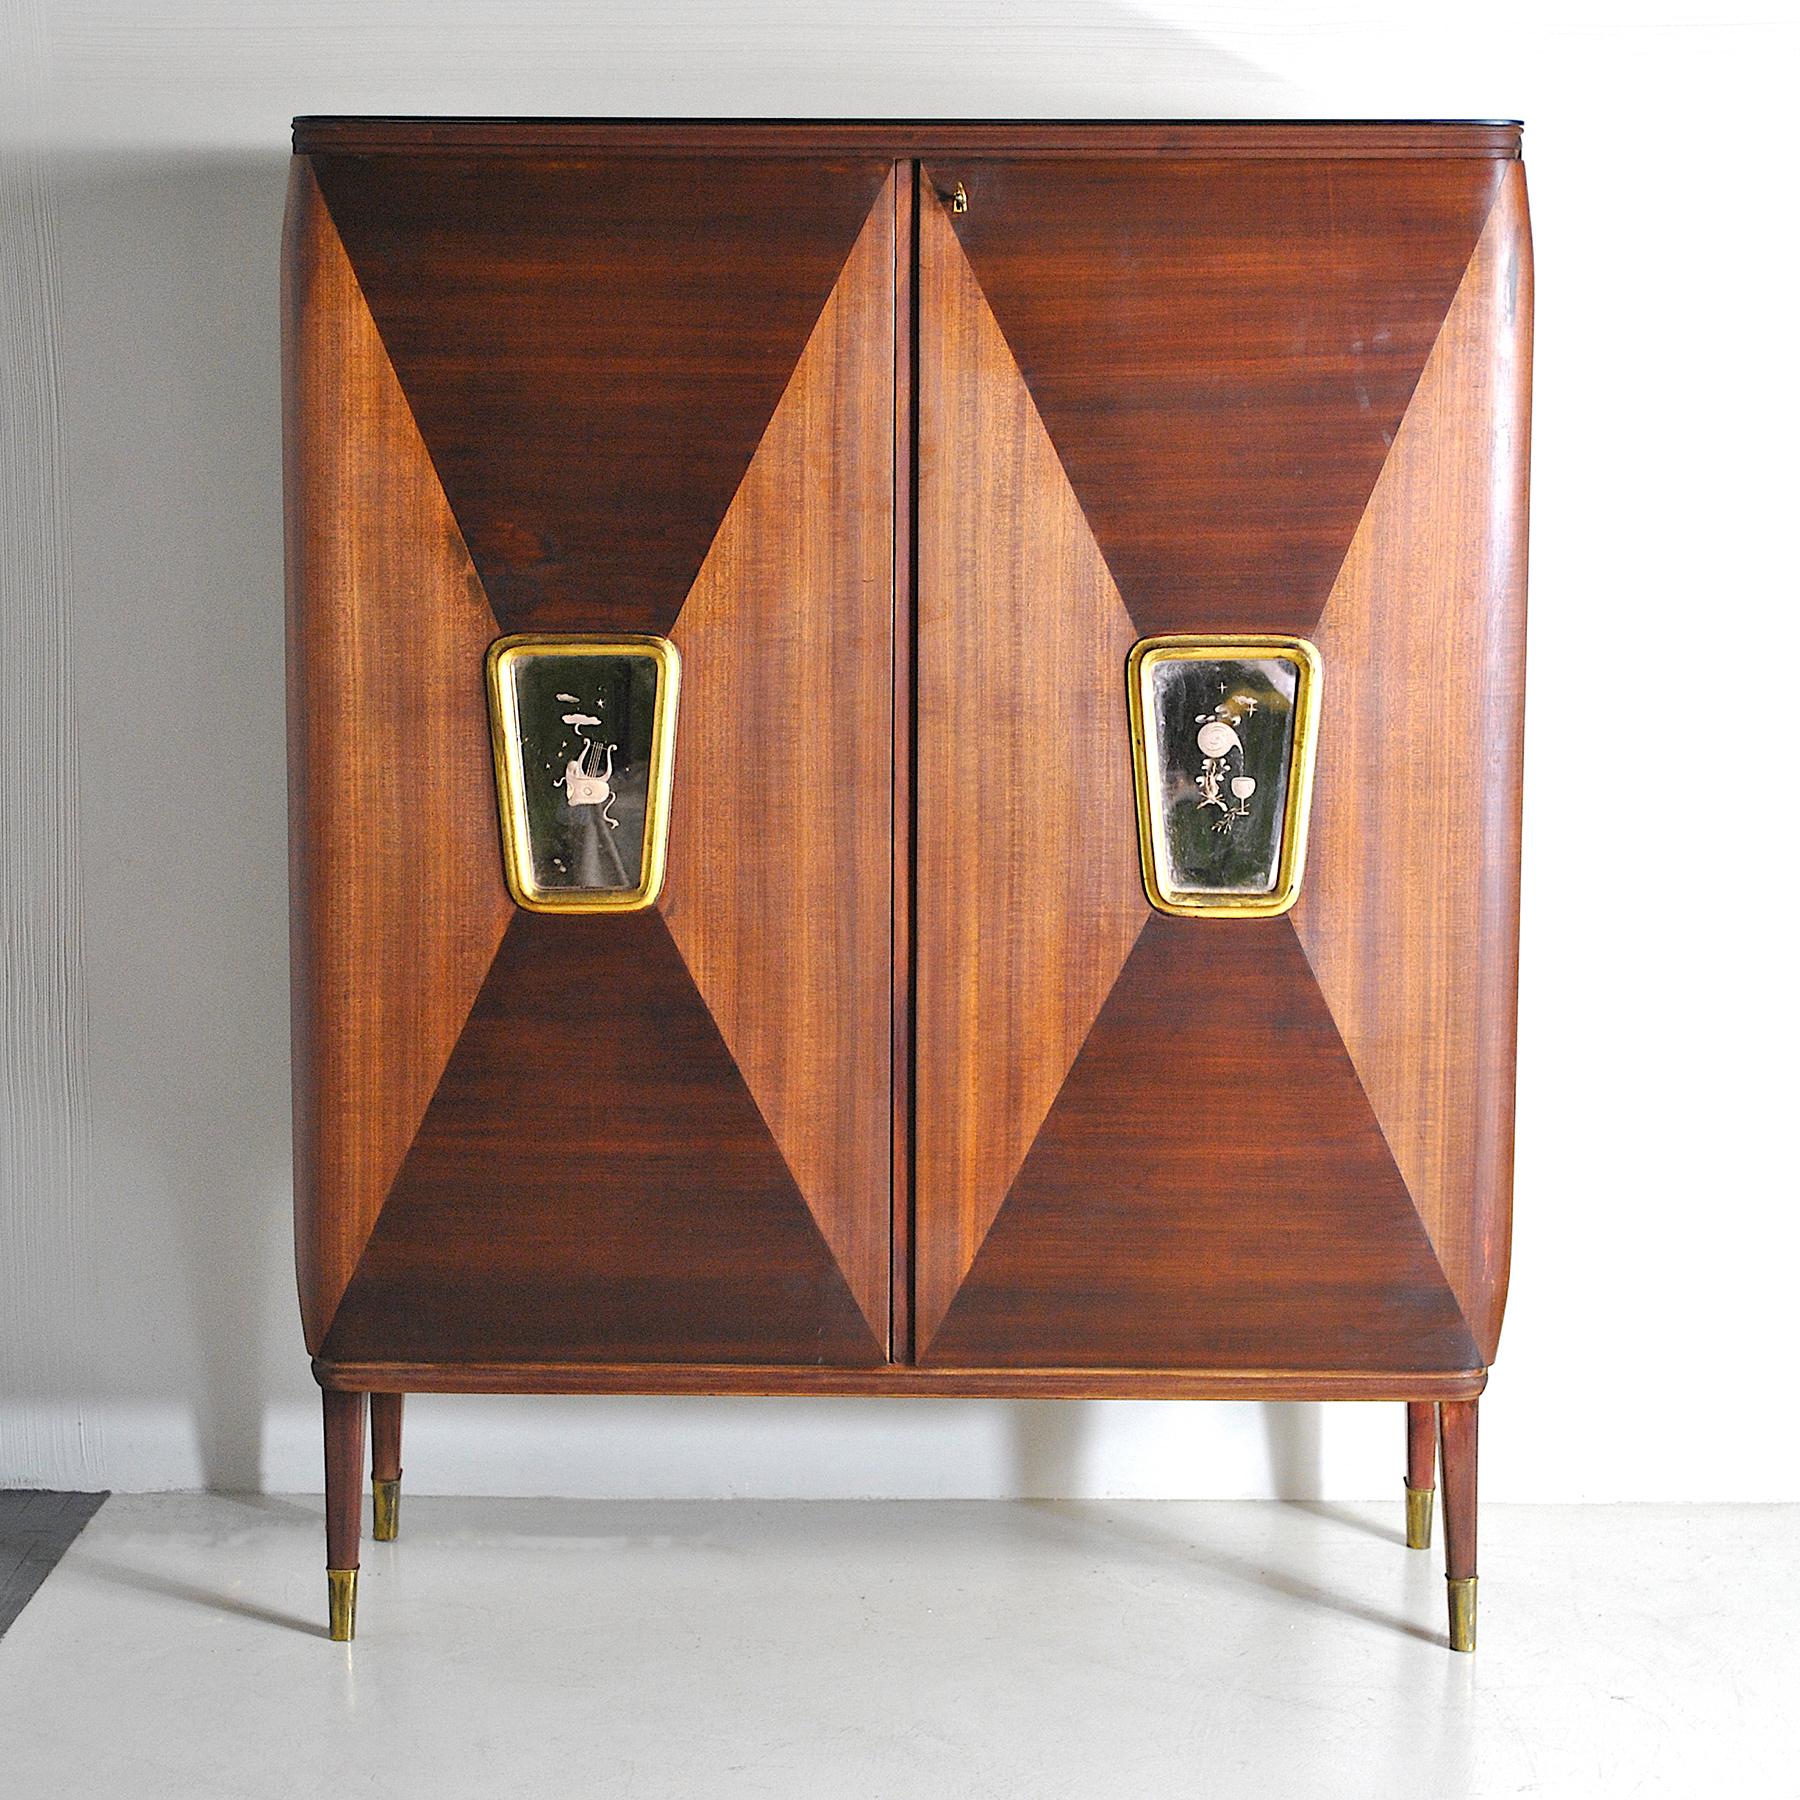 Cabinet bar in the style of Gio Ponti with light inside. The two lockable doors are embellished with frosted glass portholes with brass frame.